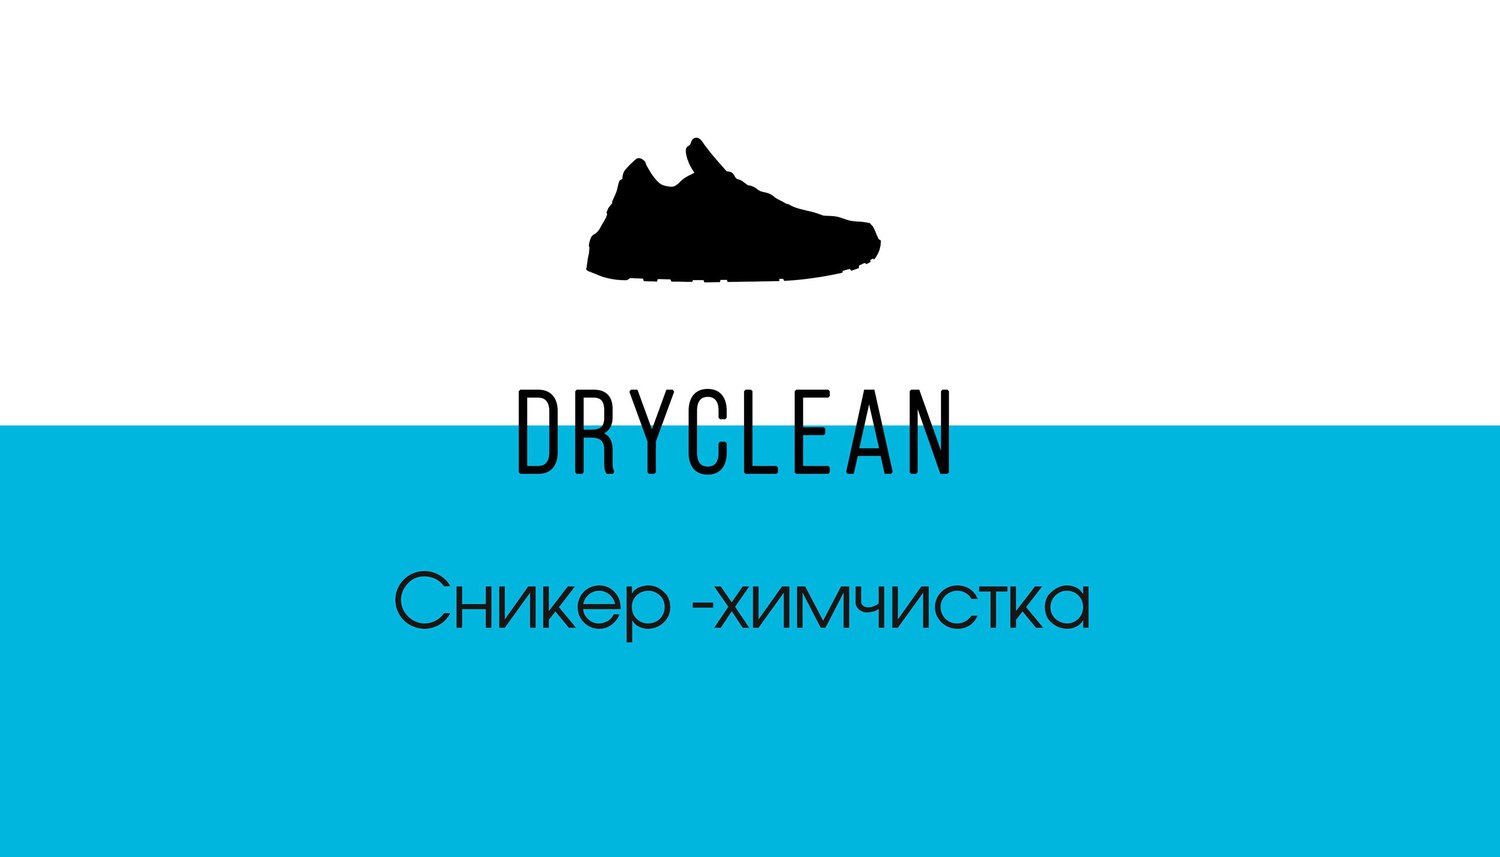 <span style="font-weight: bold;">Dry Clean</span><br>